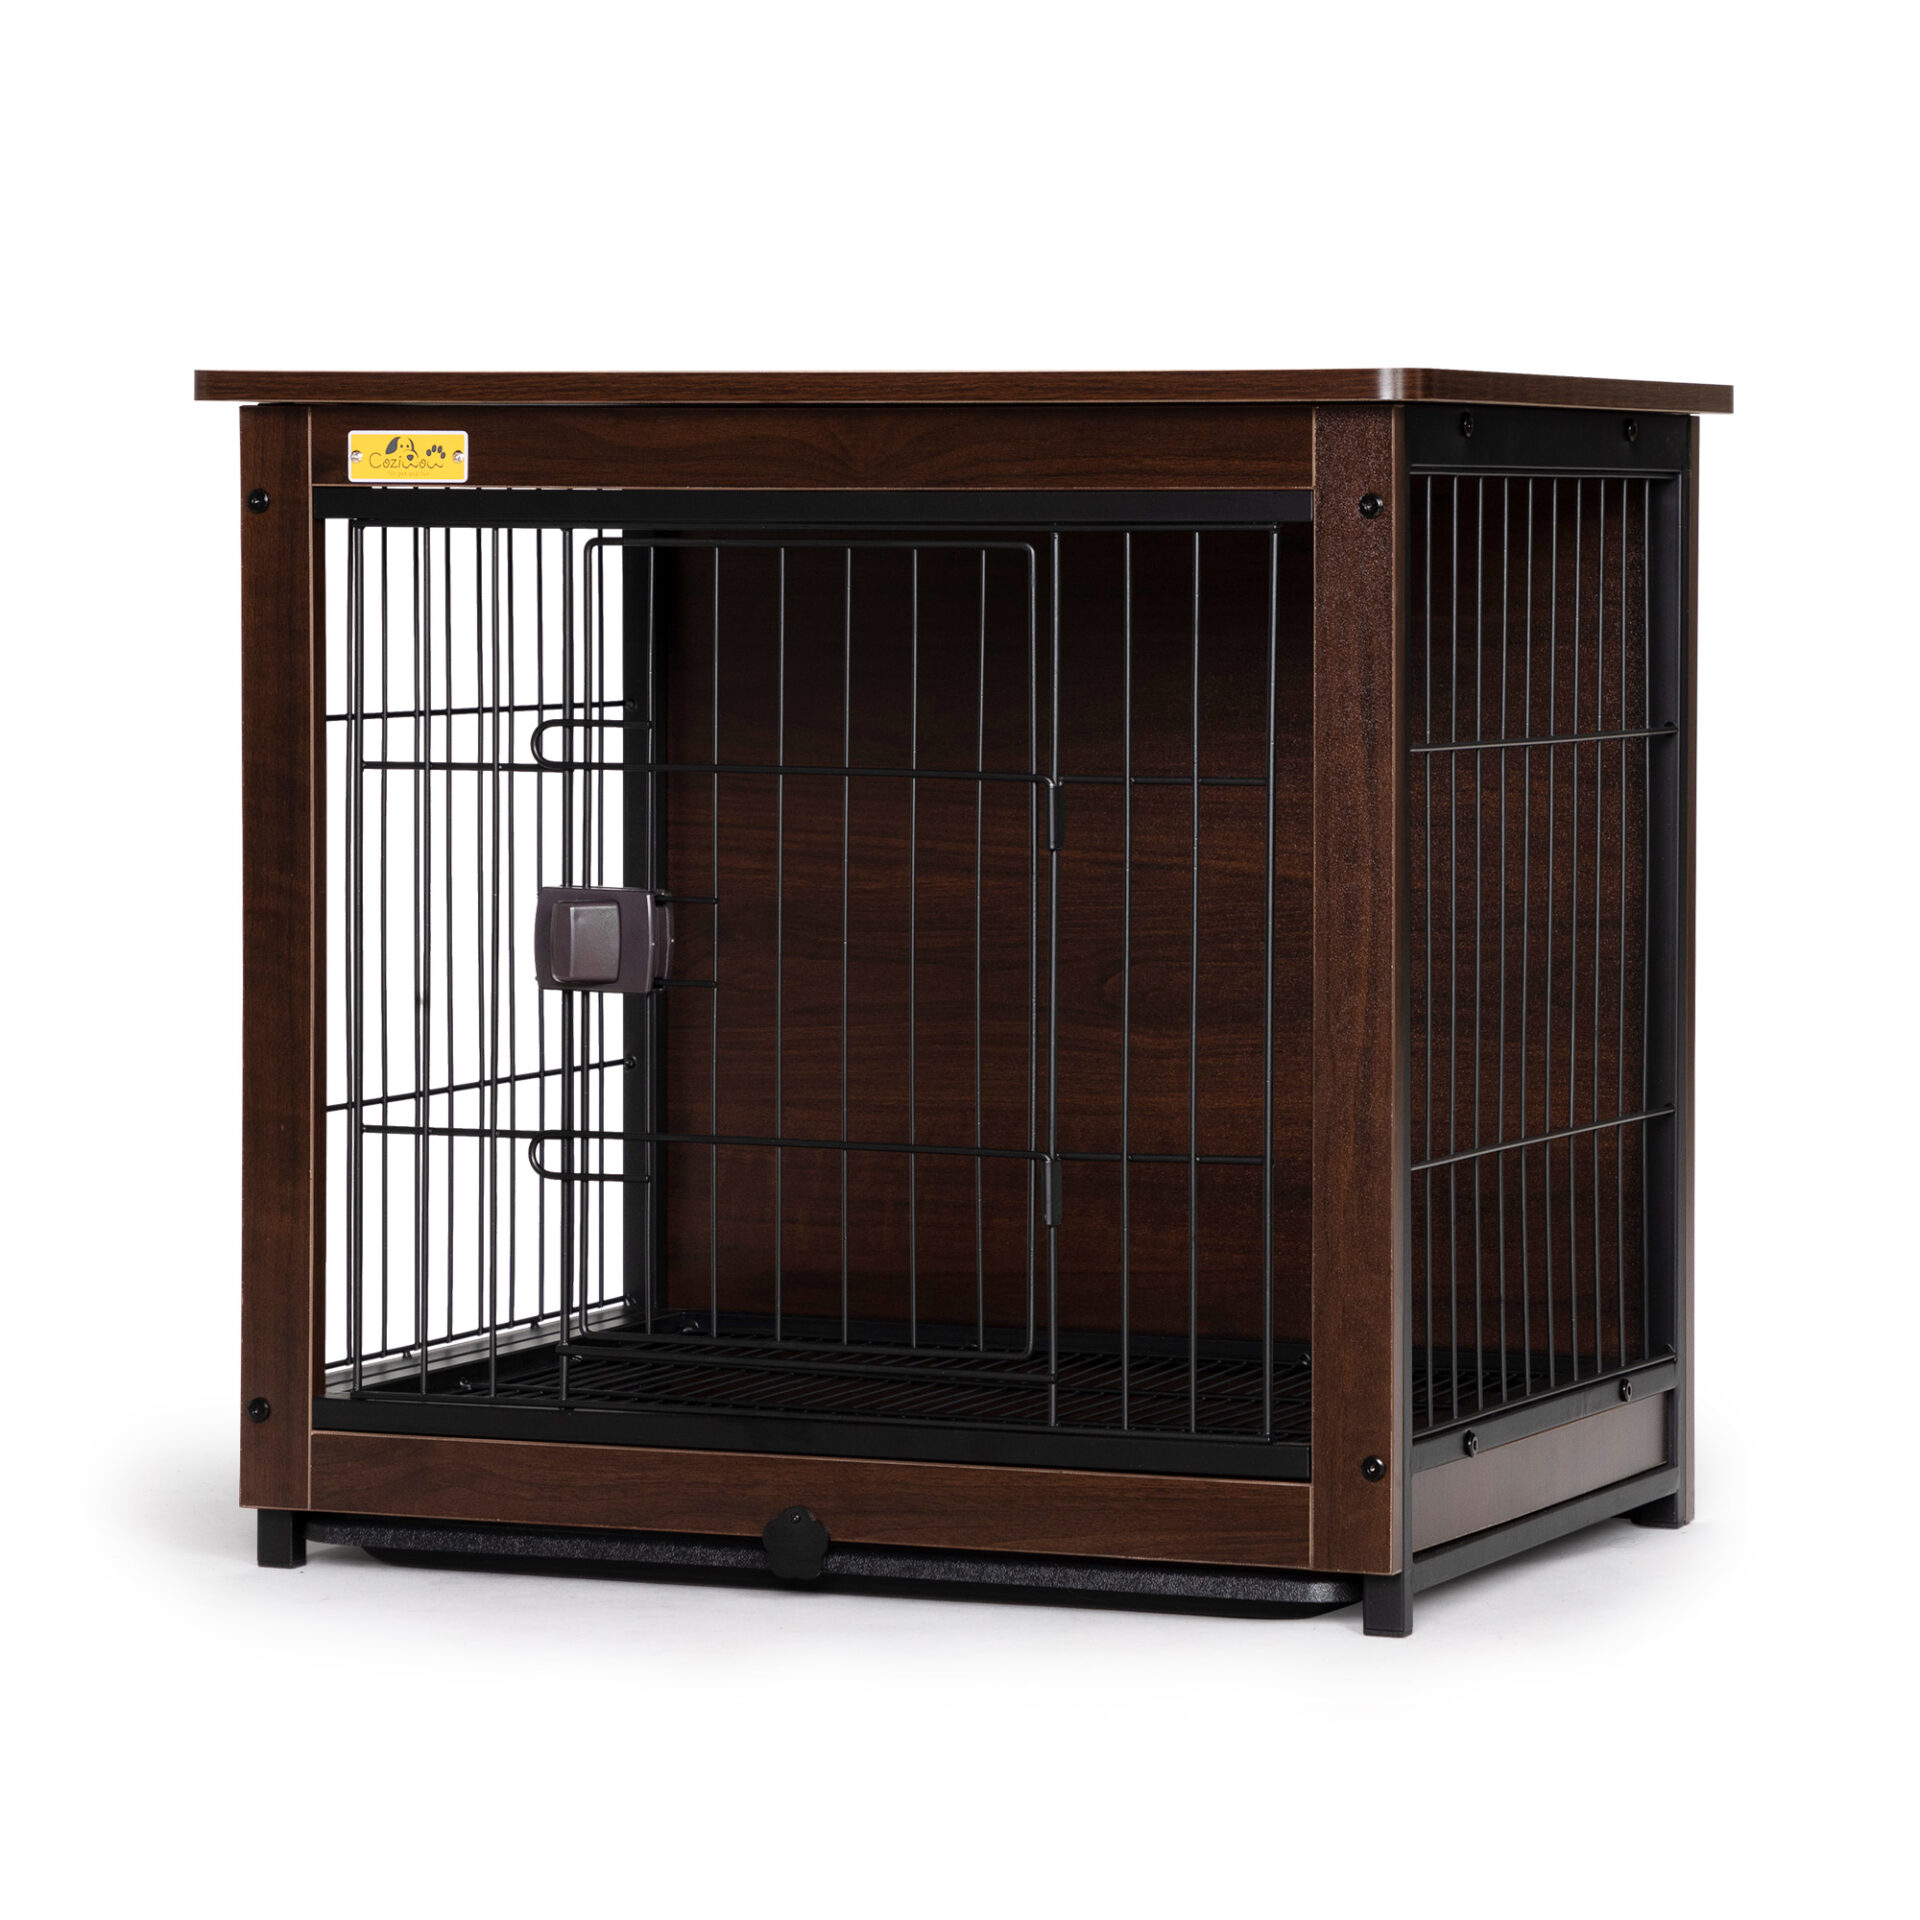 Coziwow Furniture Wooden Dog Crate End Table W/ Removable Tray and Lockable Door, Dog Kennel Pet Cage Wire Pet House, Walnut (Small) CW12G0508 3